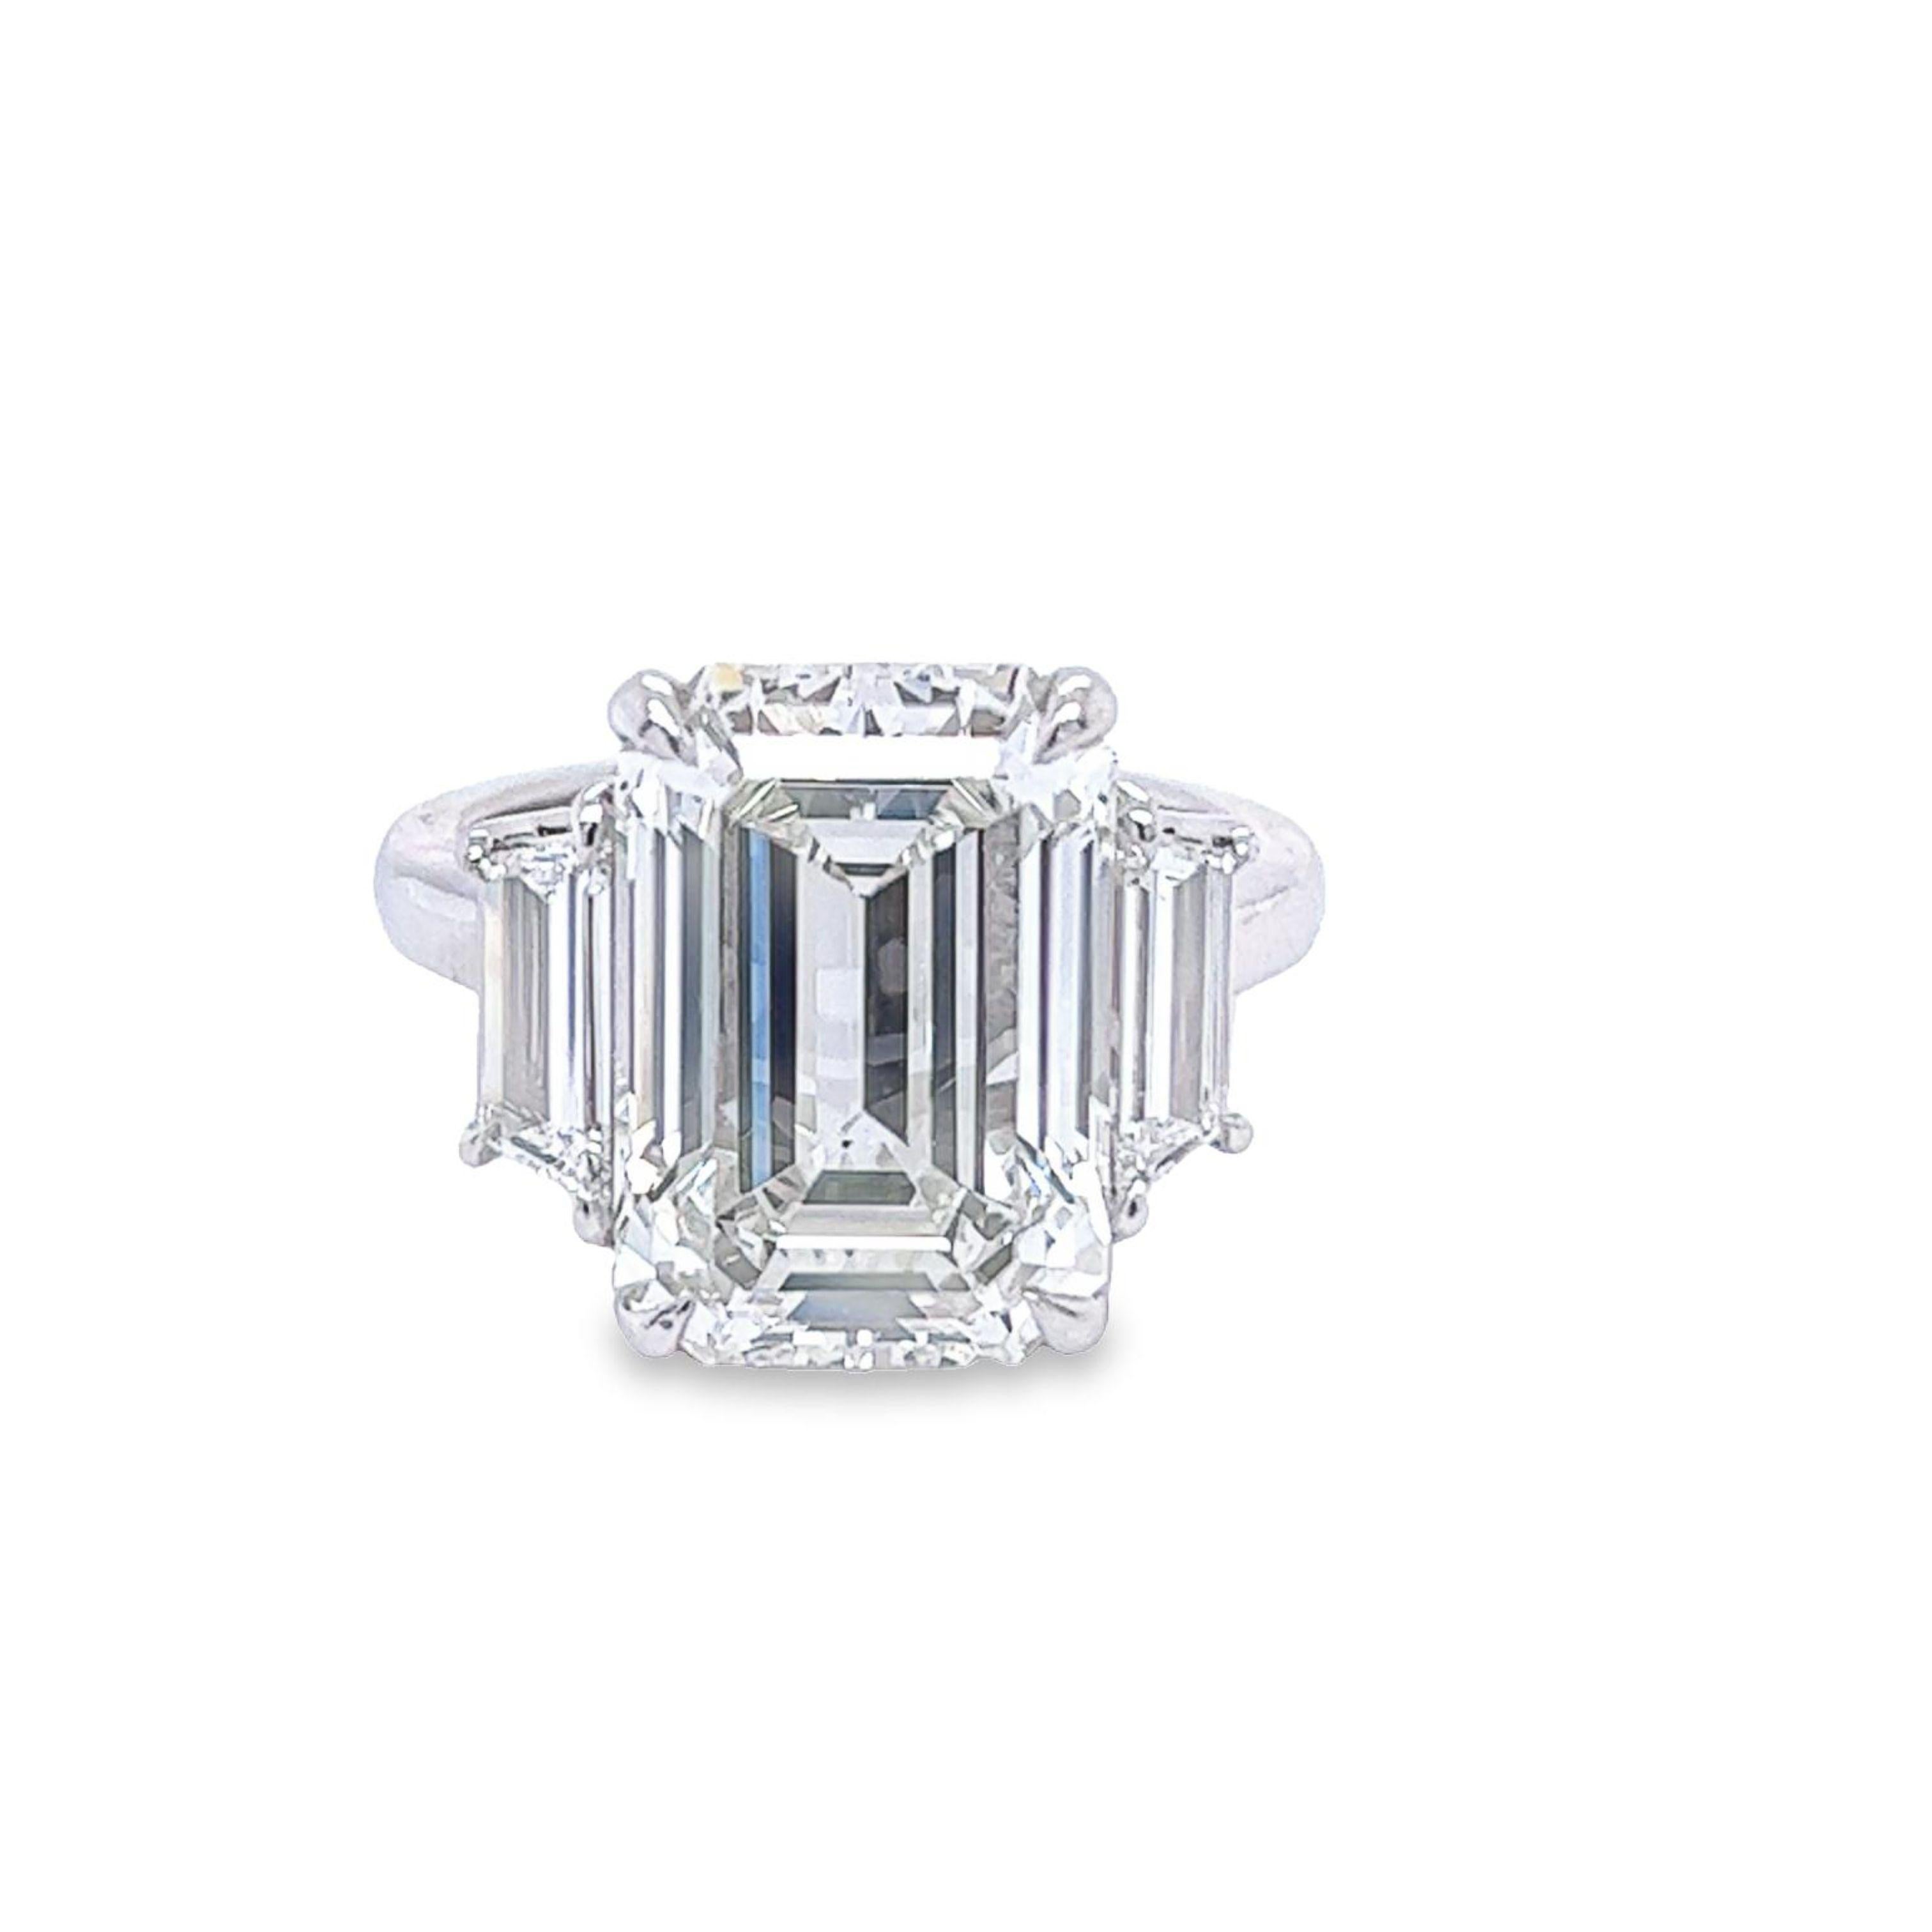 Rosenberg Diamonds & Co. 8.37 carat Emerald cut I color VS1 clarity is accompanied by a GIA certificate. This gorgeous Emerald is set in a handmade platinum setting with perfectly matched pair of step cut side stones flanking on both sides with a